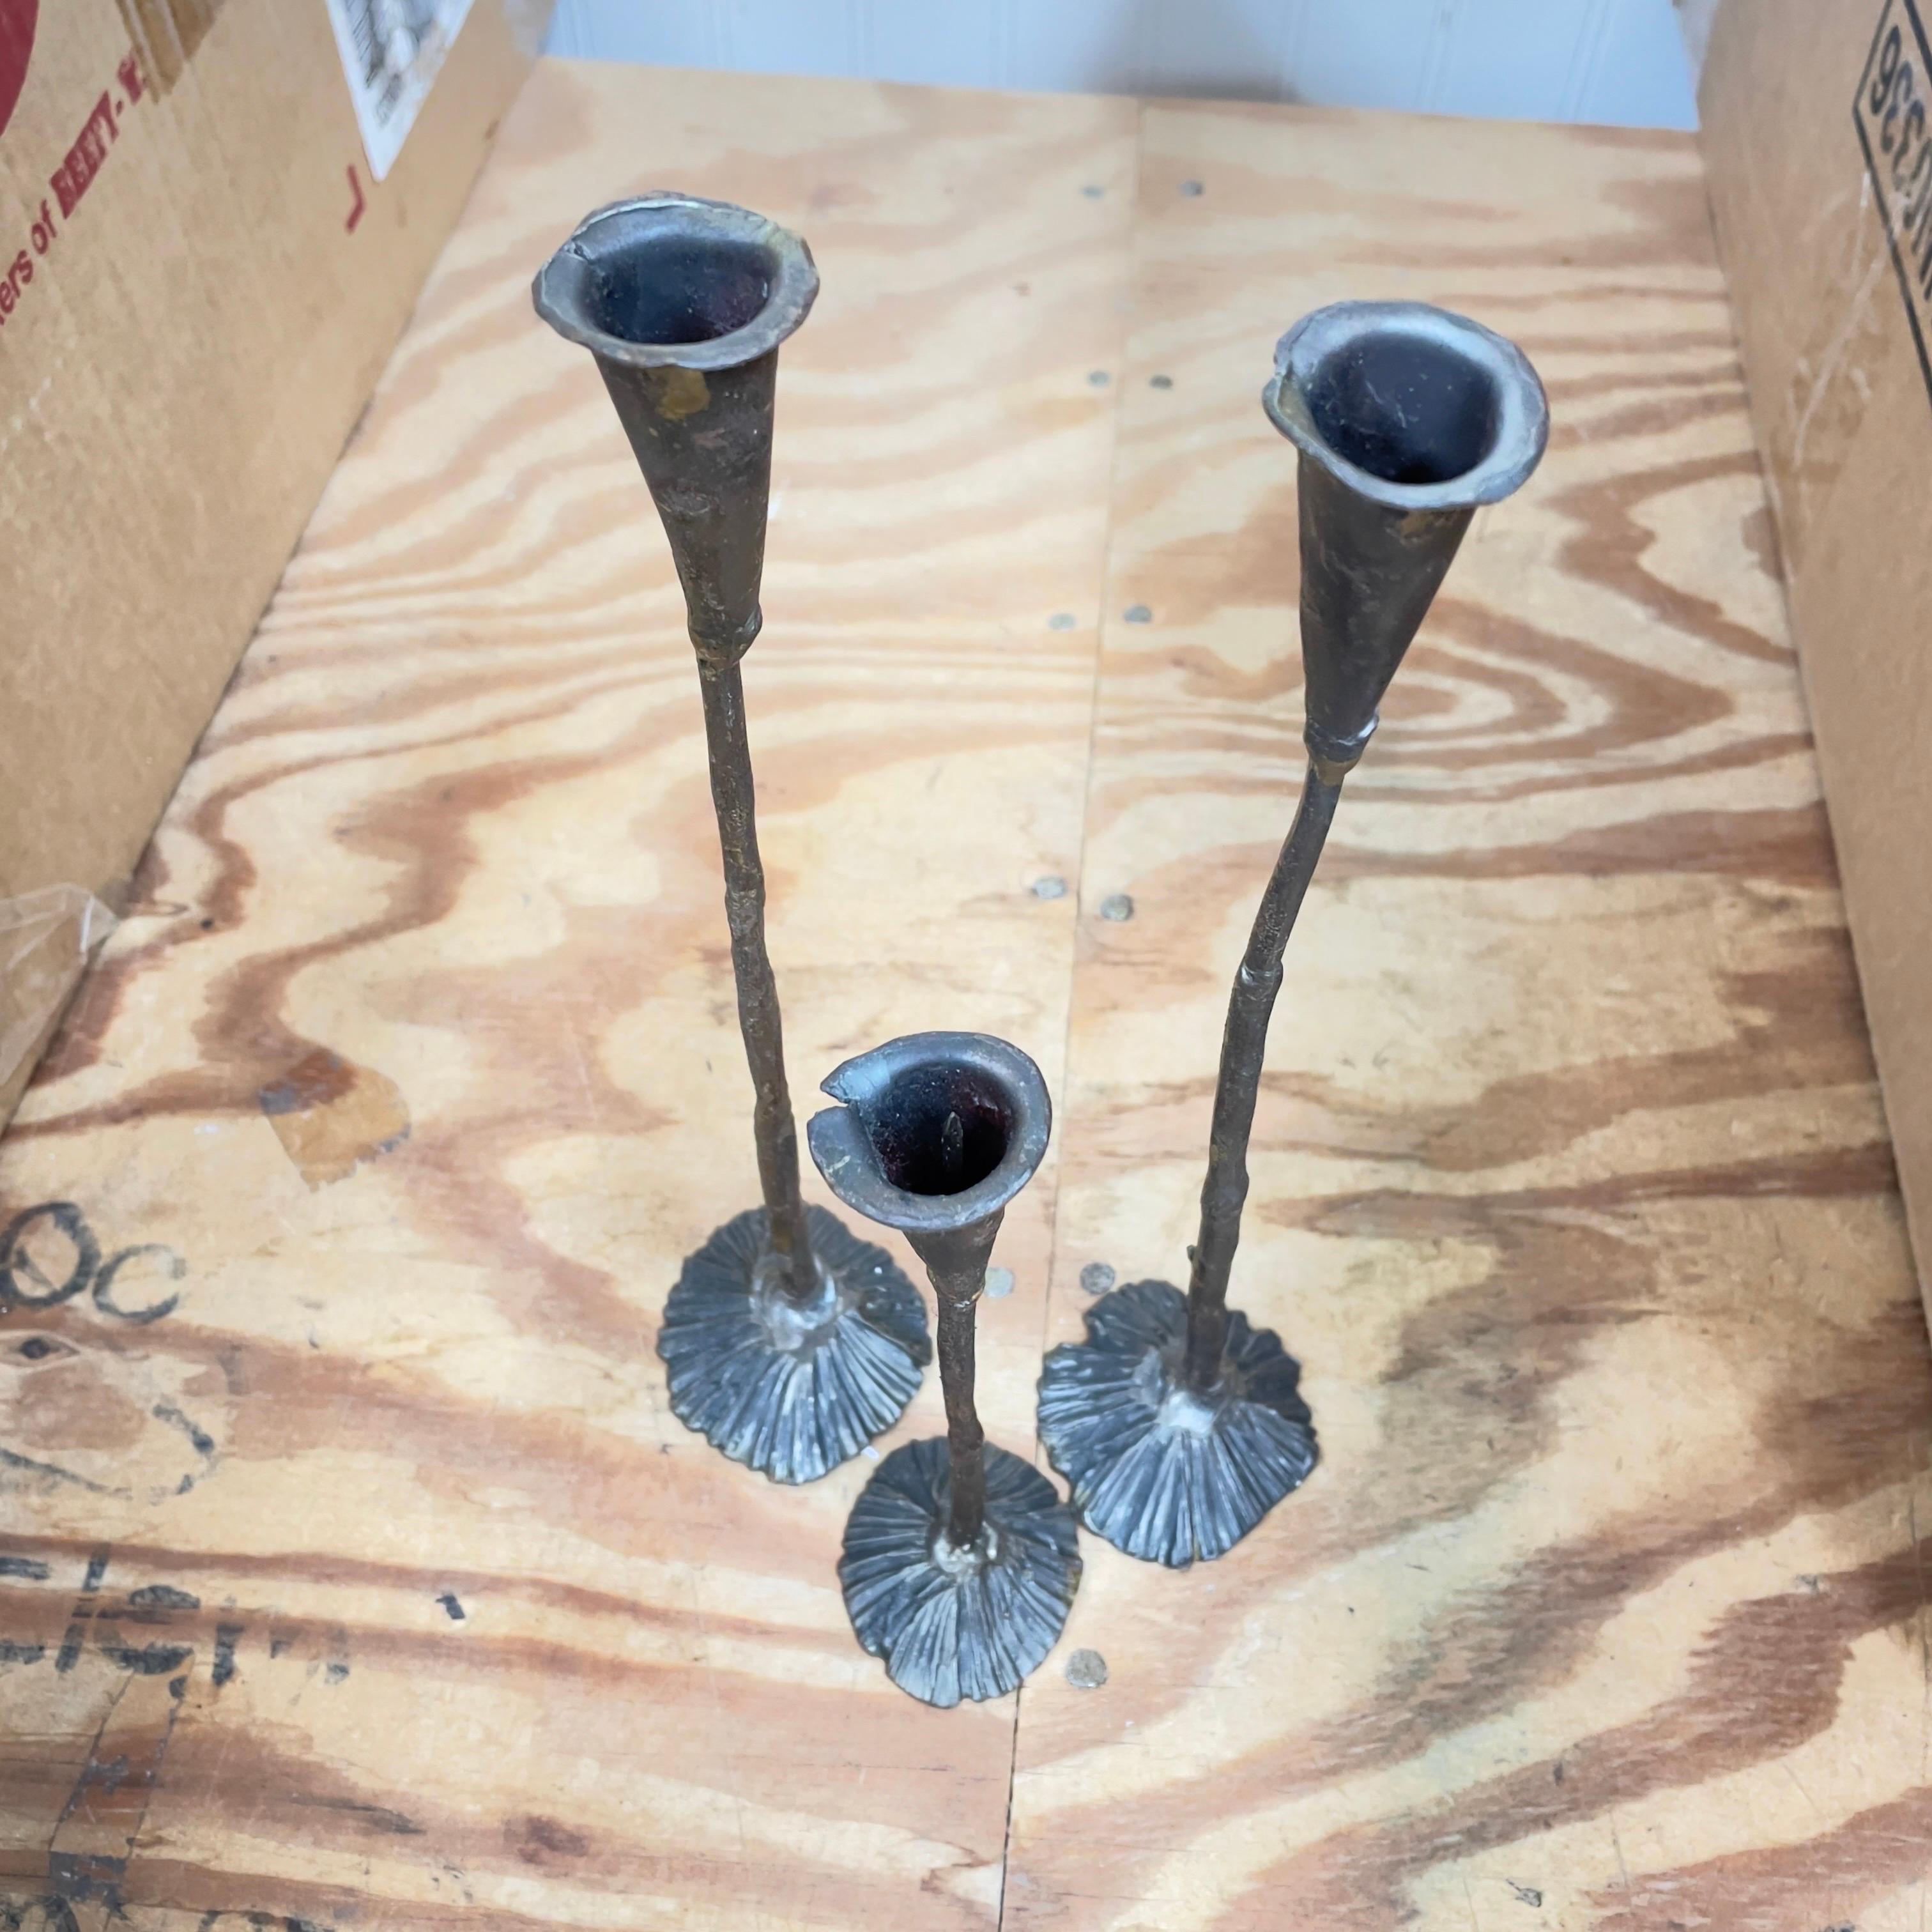 Set of three candlestick holders. Two are the same height and one is much shorter than the matching pair. Unusual brutalist style. Appears to be hand forged. 